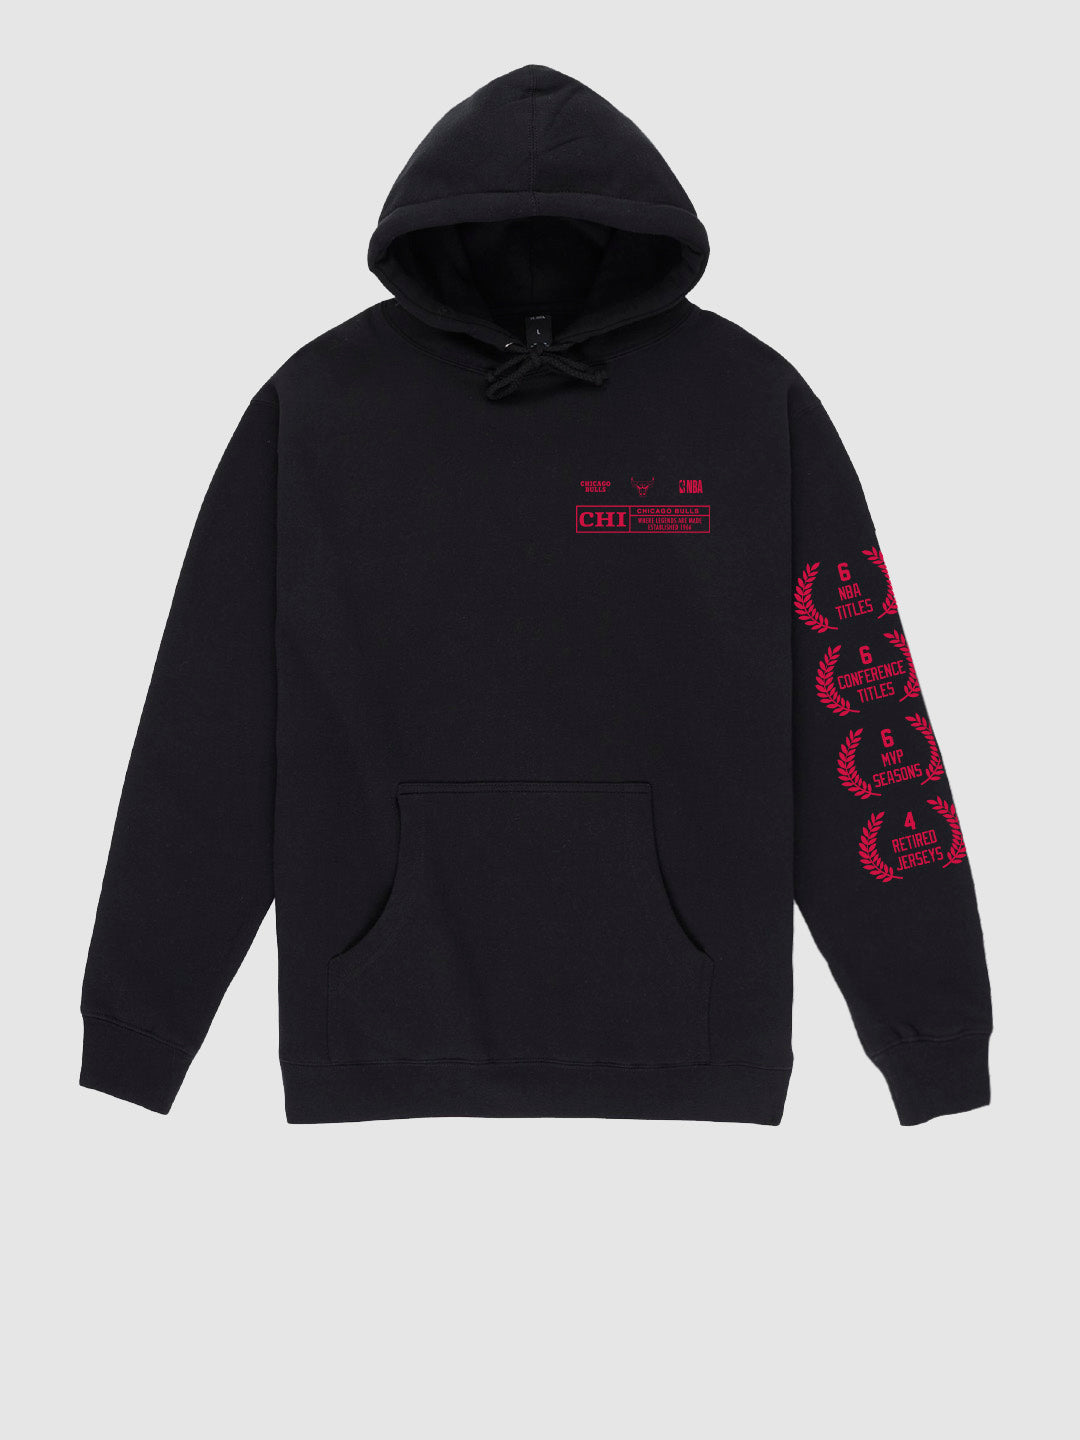 The Bulls Check The Credits Hoodie